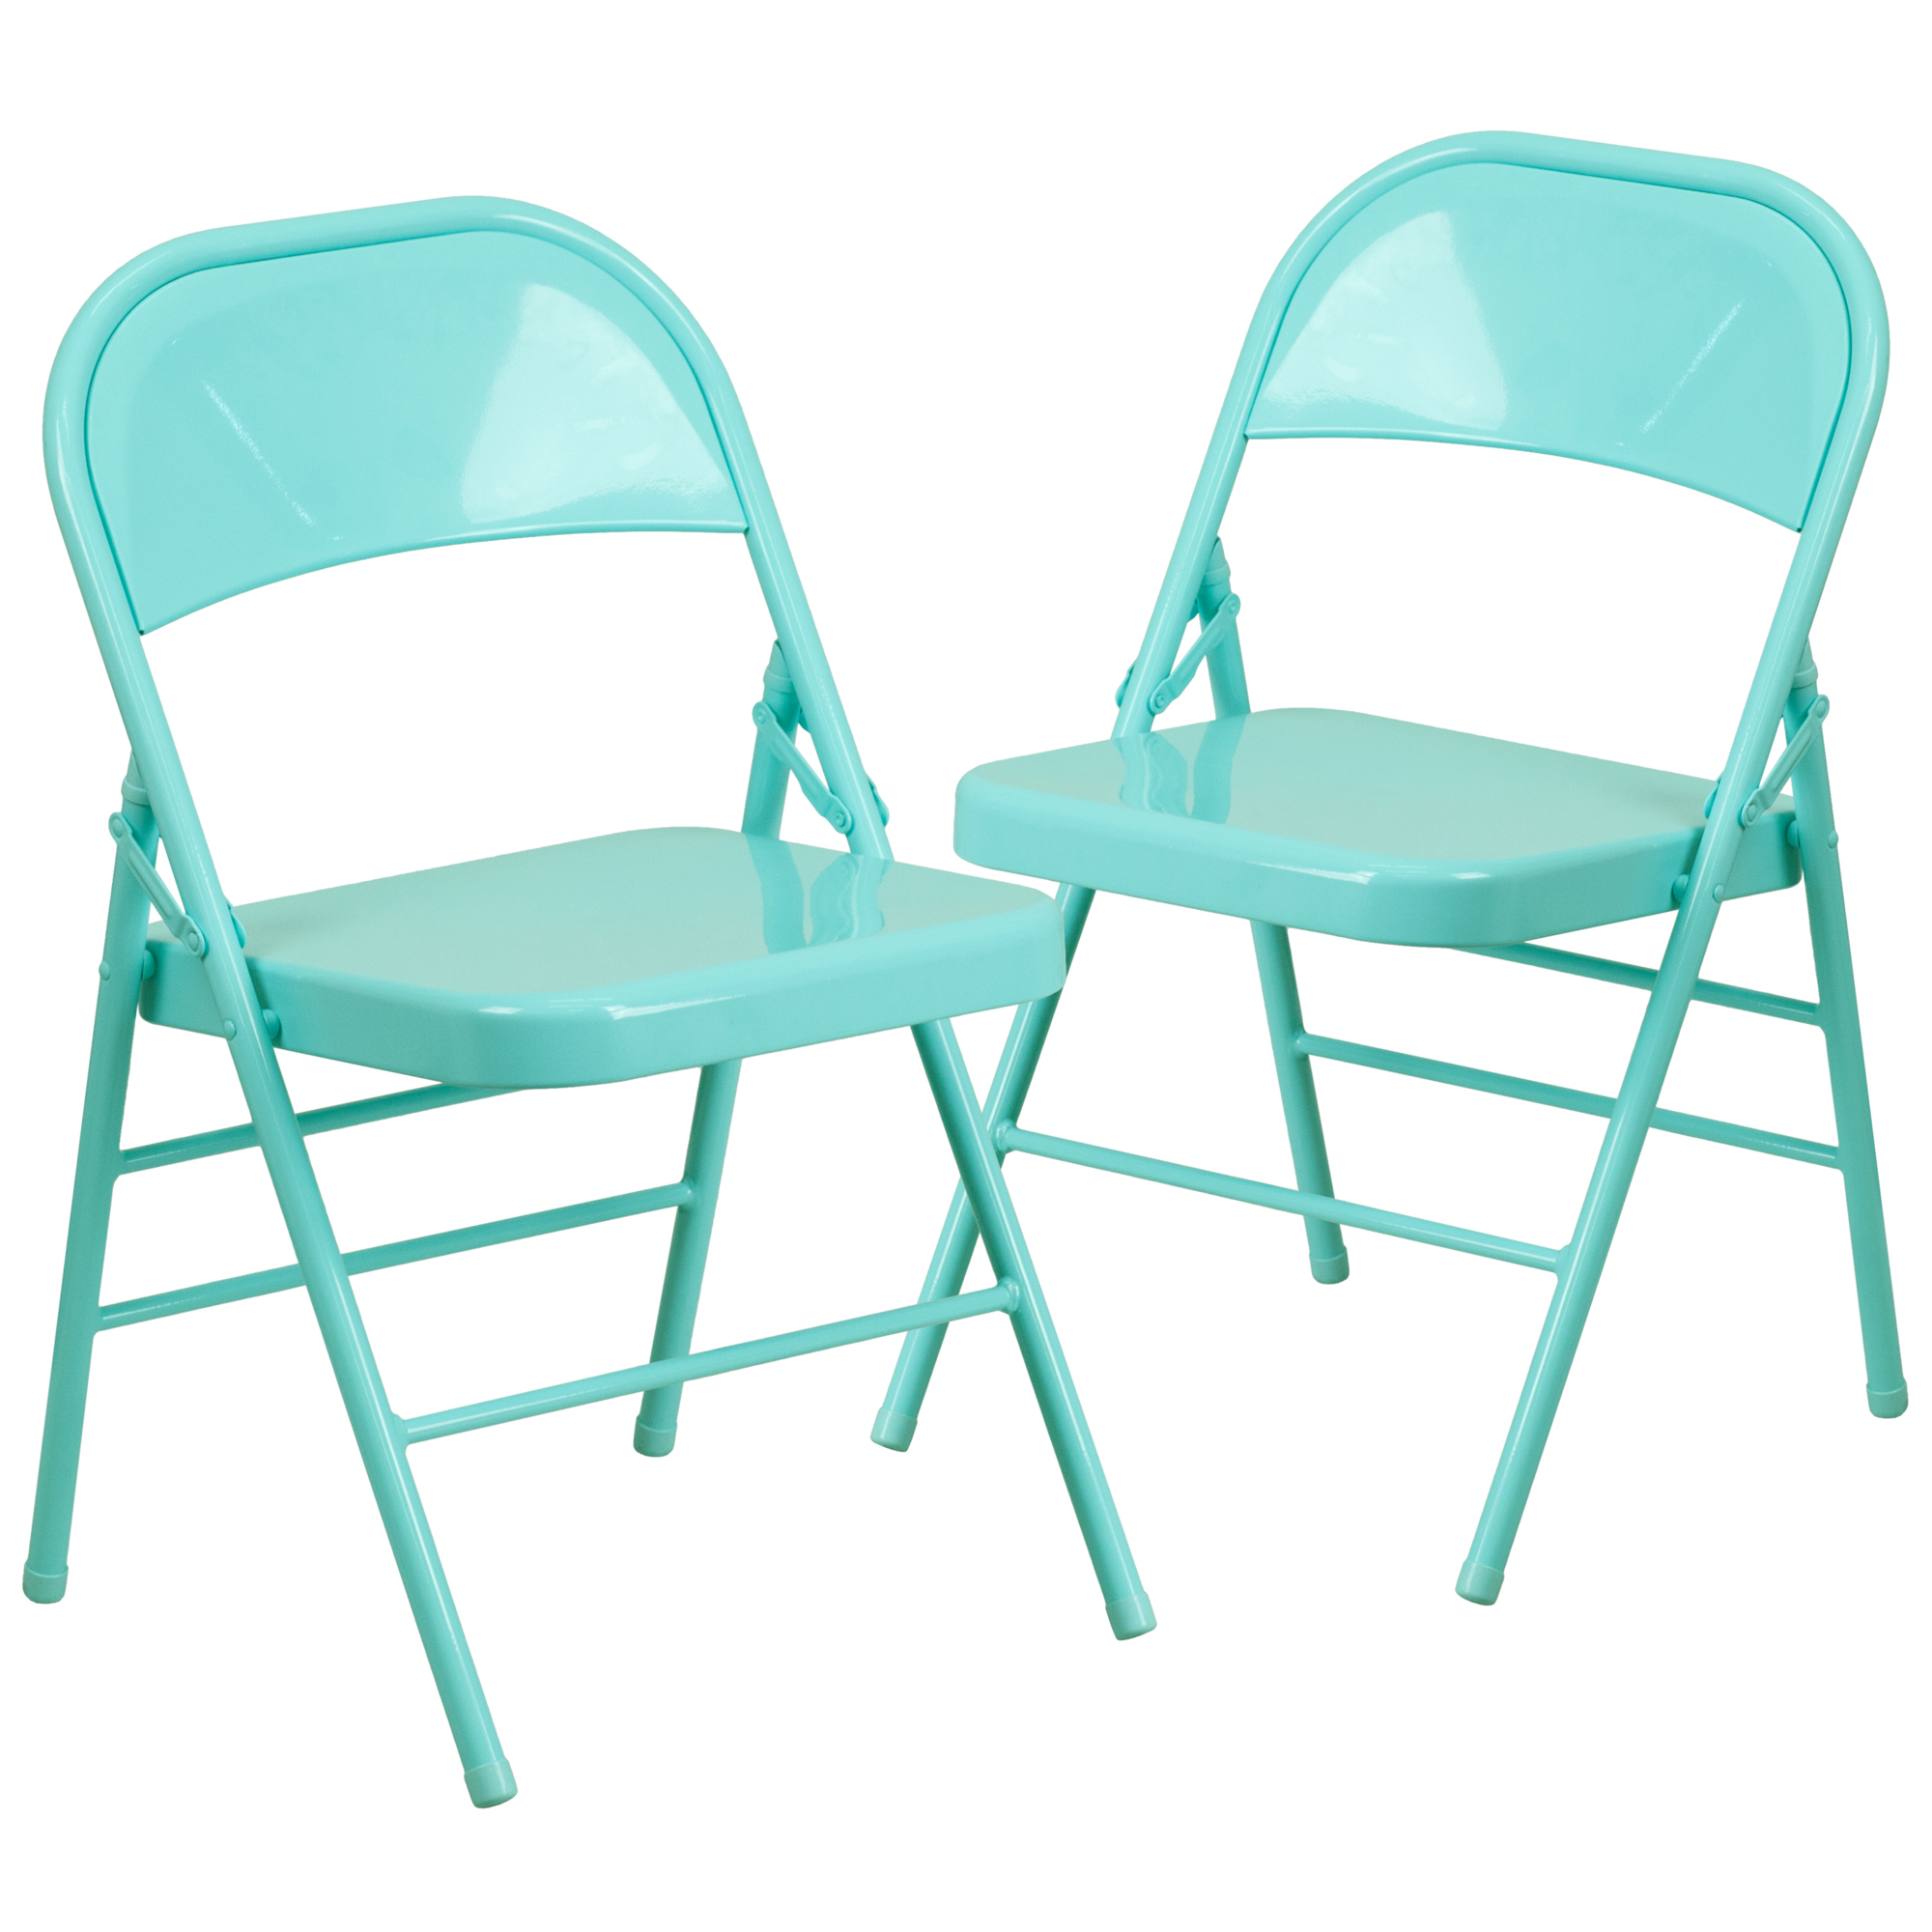 Flash Furniture, Tantalizing Teal Triple Braced Metal Folding Chair, Primary Color Blue, Included (qty.) 2, Model 2HF3TEAL